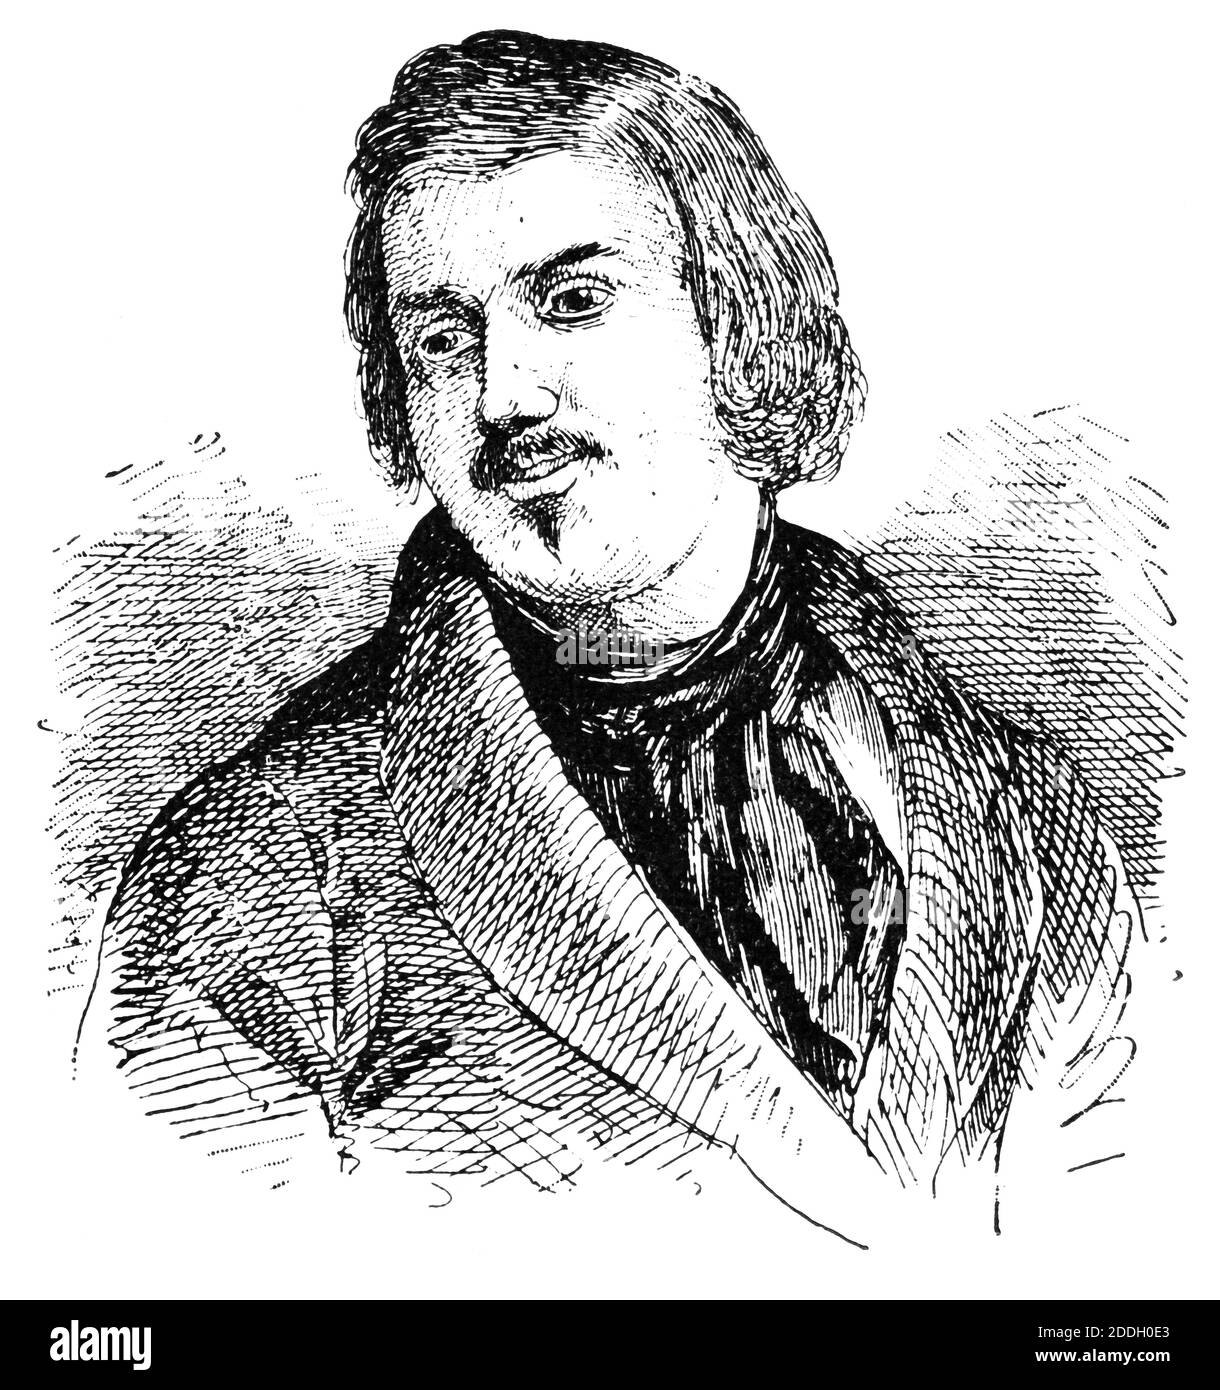 Portrait of Honore de Balzac - a French novelist and playwright. Illustration of the 19th century. White background. Stock Photo